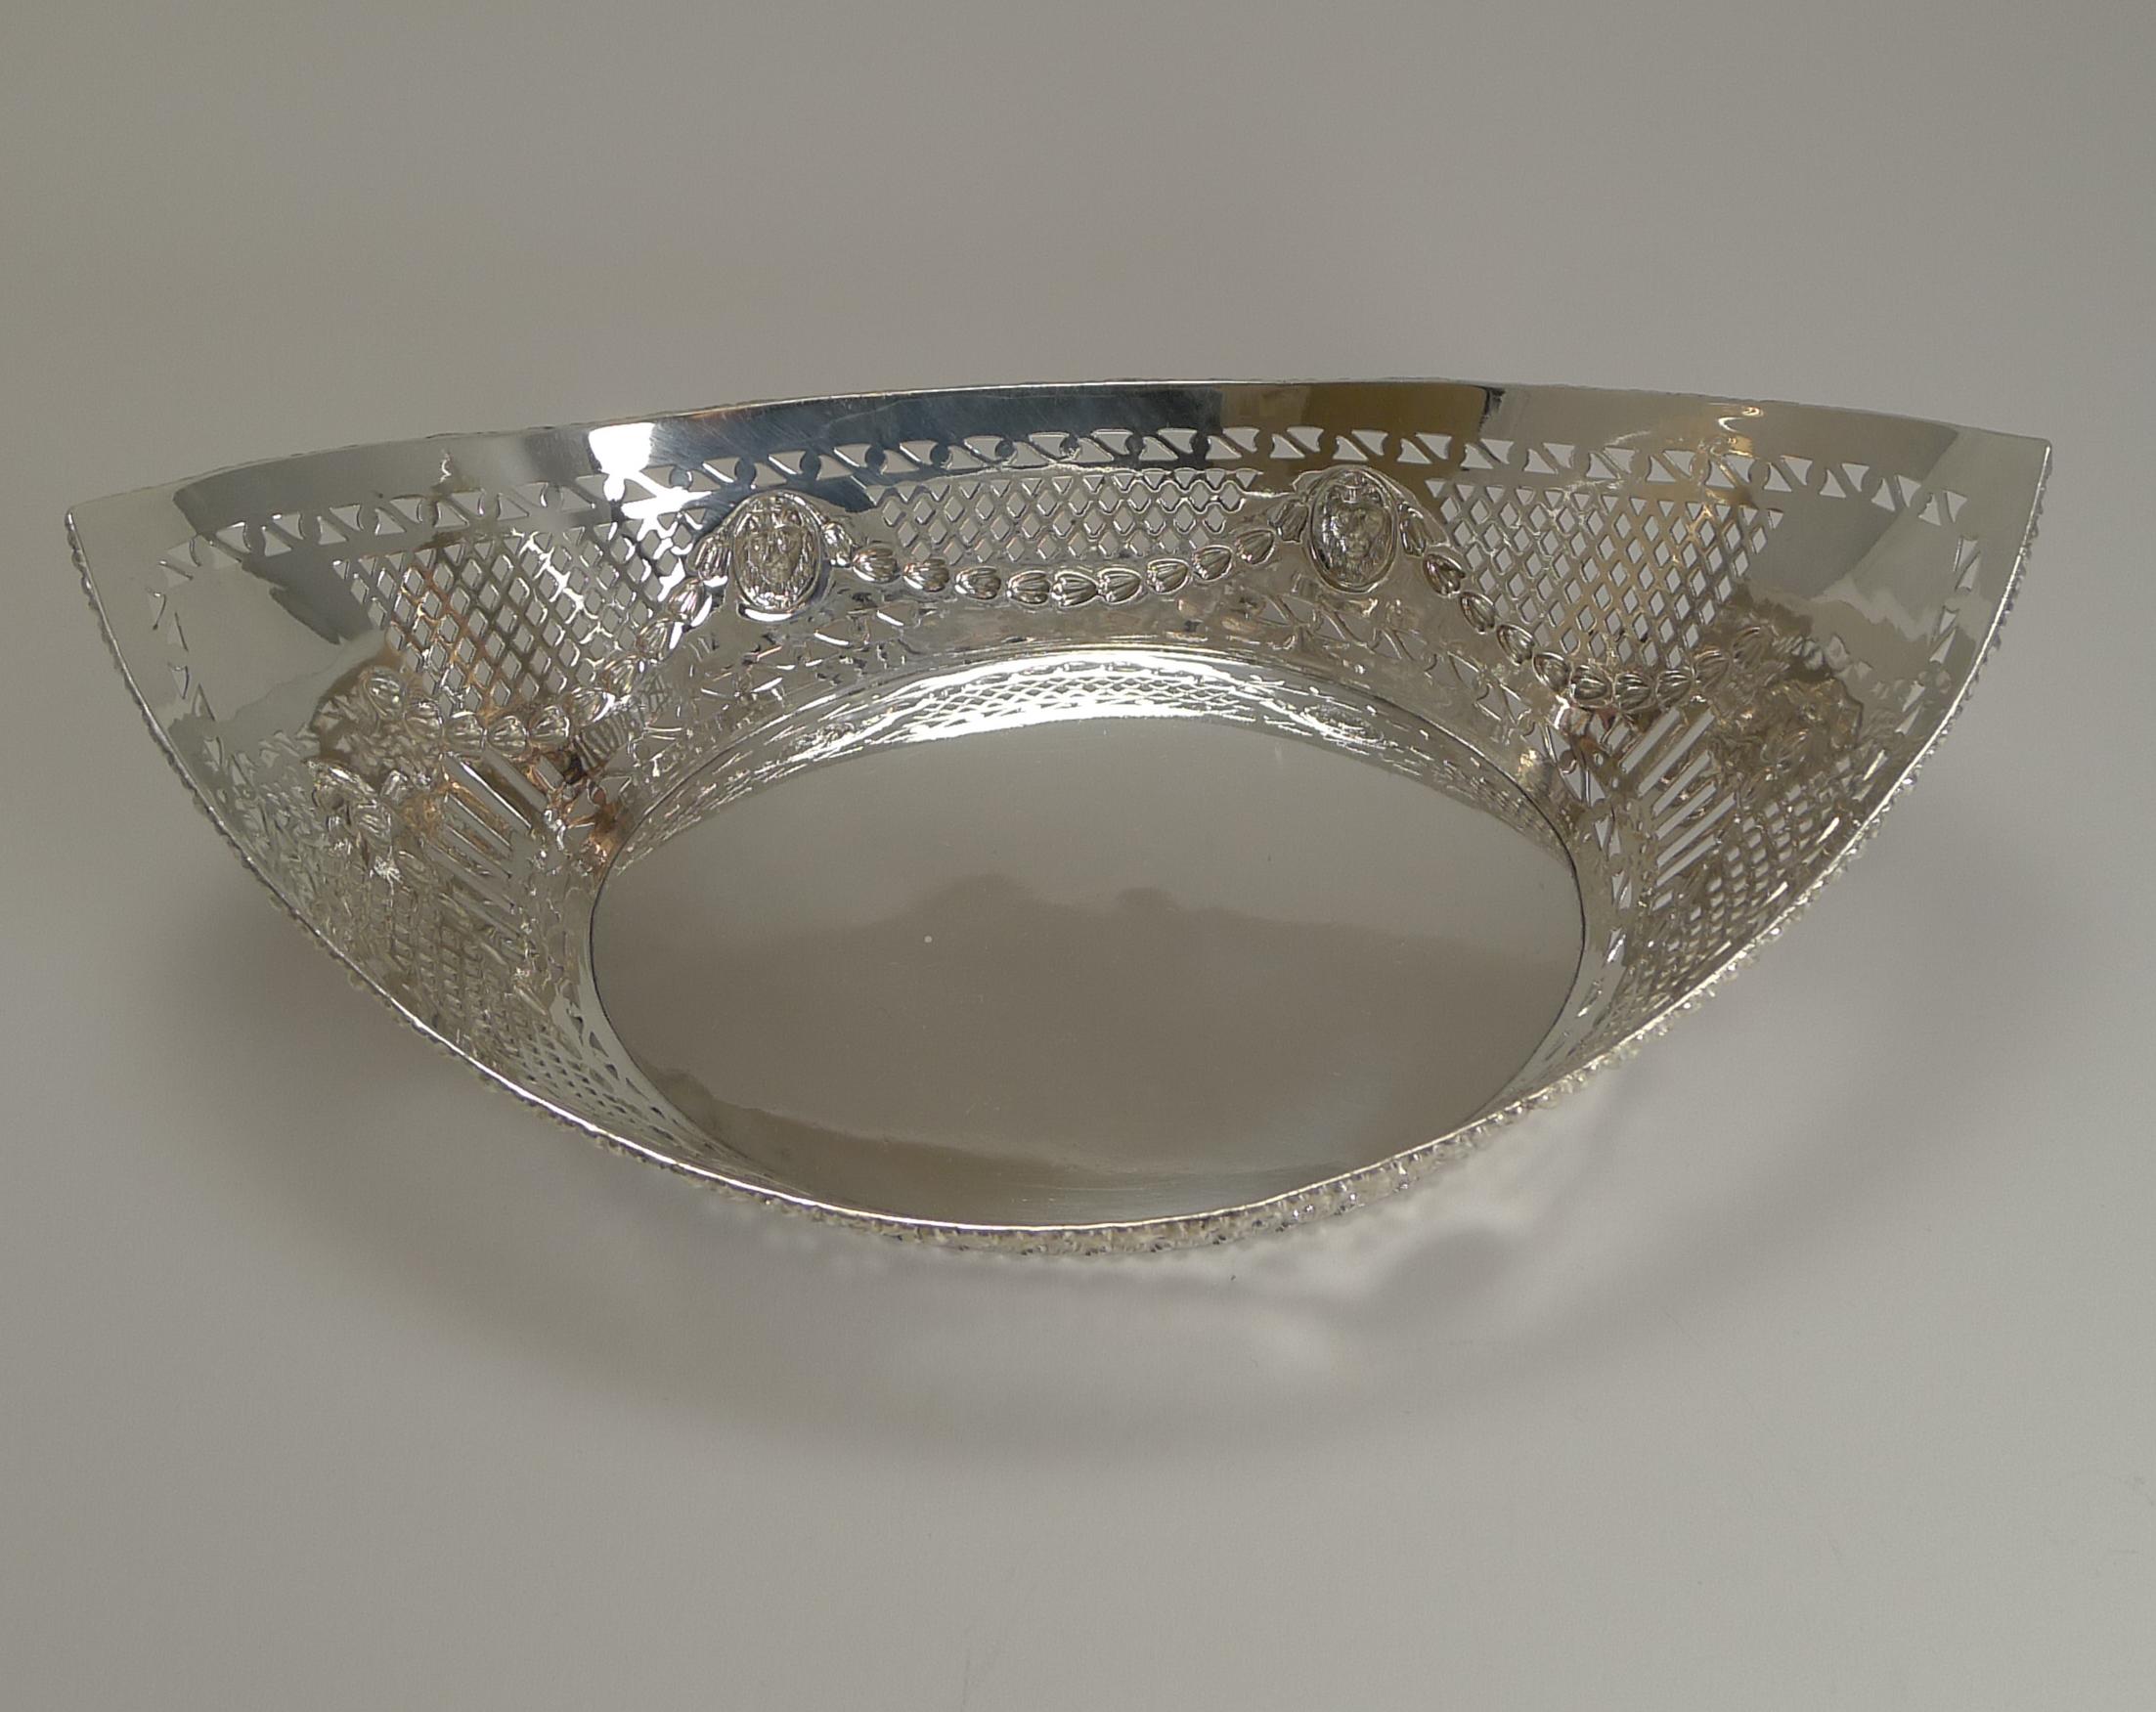 A grand and extremely handsome bread basket made from EPNS (Electro-Plated Nickel Silver) and dating to circa 1900.

The beautifully shaped basket is pierced or reticulated with a raised border to the rim and foot and a continuous repousse foliate